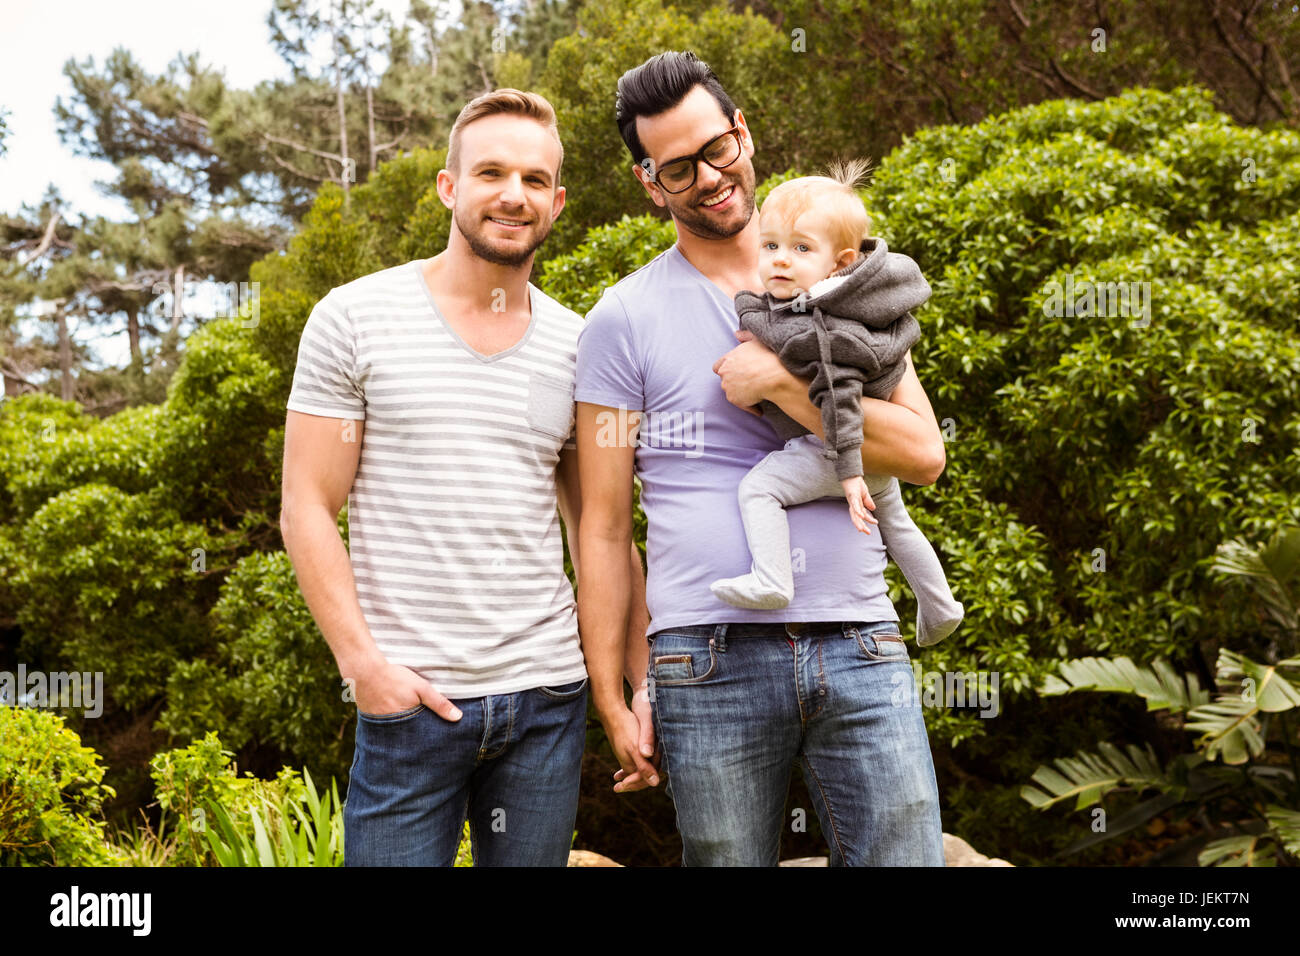 Smiling gay couple with child Stock Photo